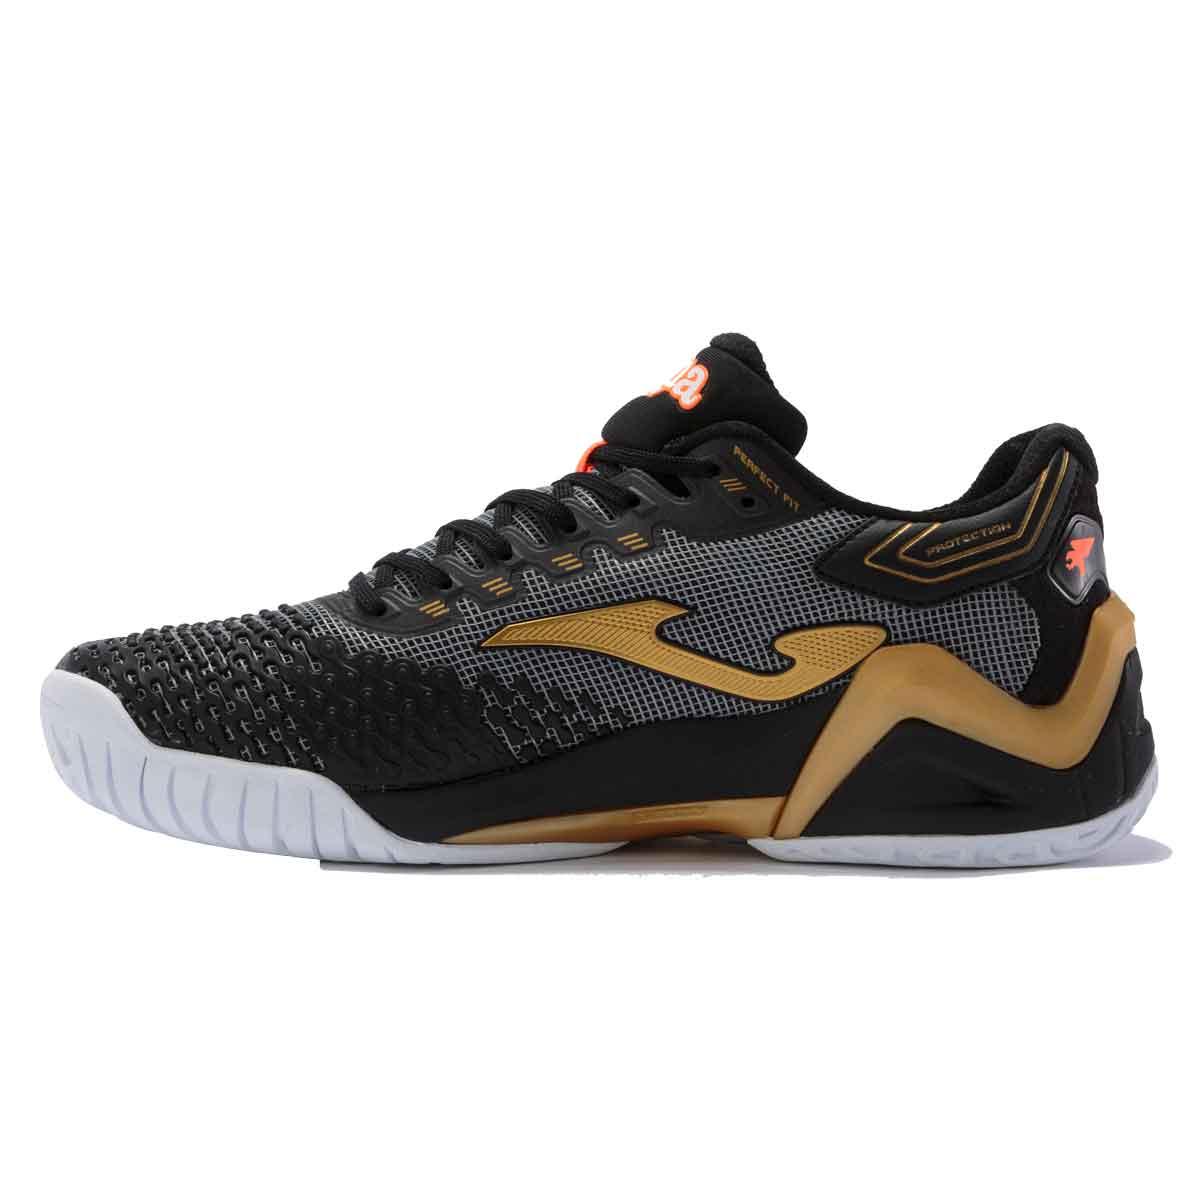 Buy Joma Ace Pro Mens Tennis Shoes (Black Gold) Online India